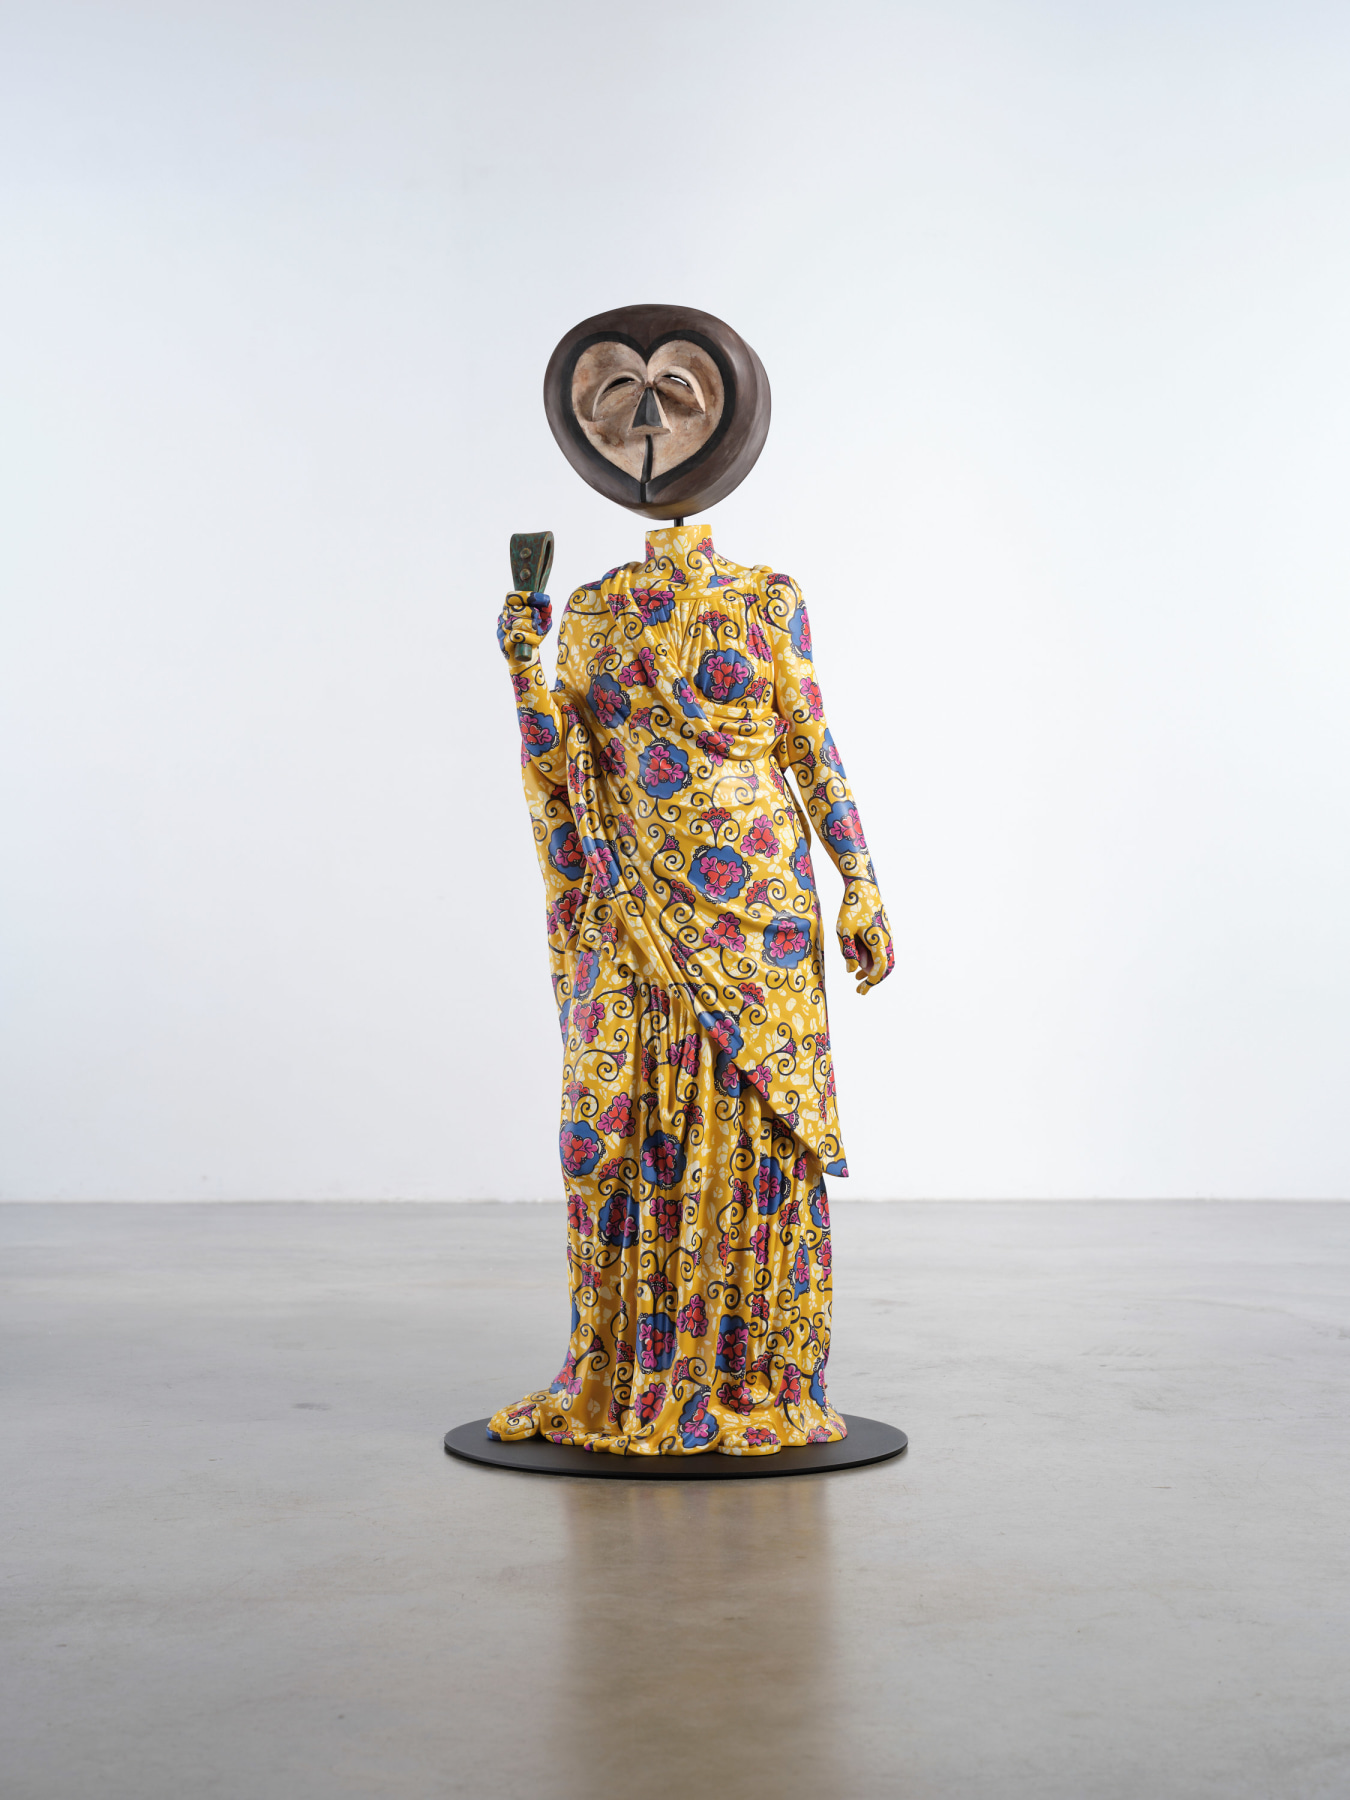 Yinka Shonibare | Restitution of the Mind and Soul - Goodman Gallery, Cape Town - Viewing Room - Goodman Gallery Viewing Room